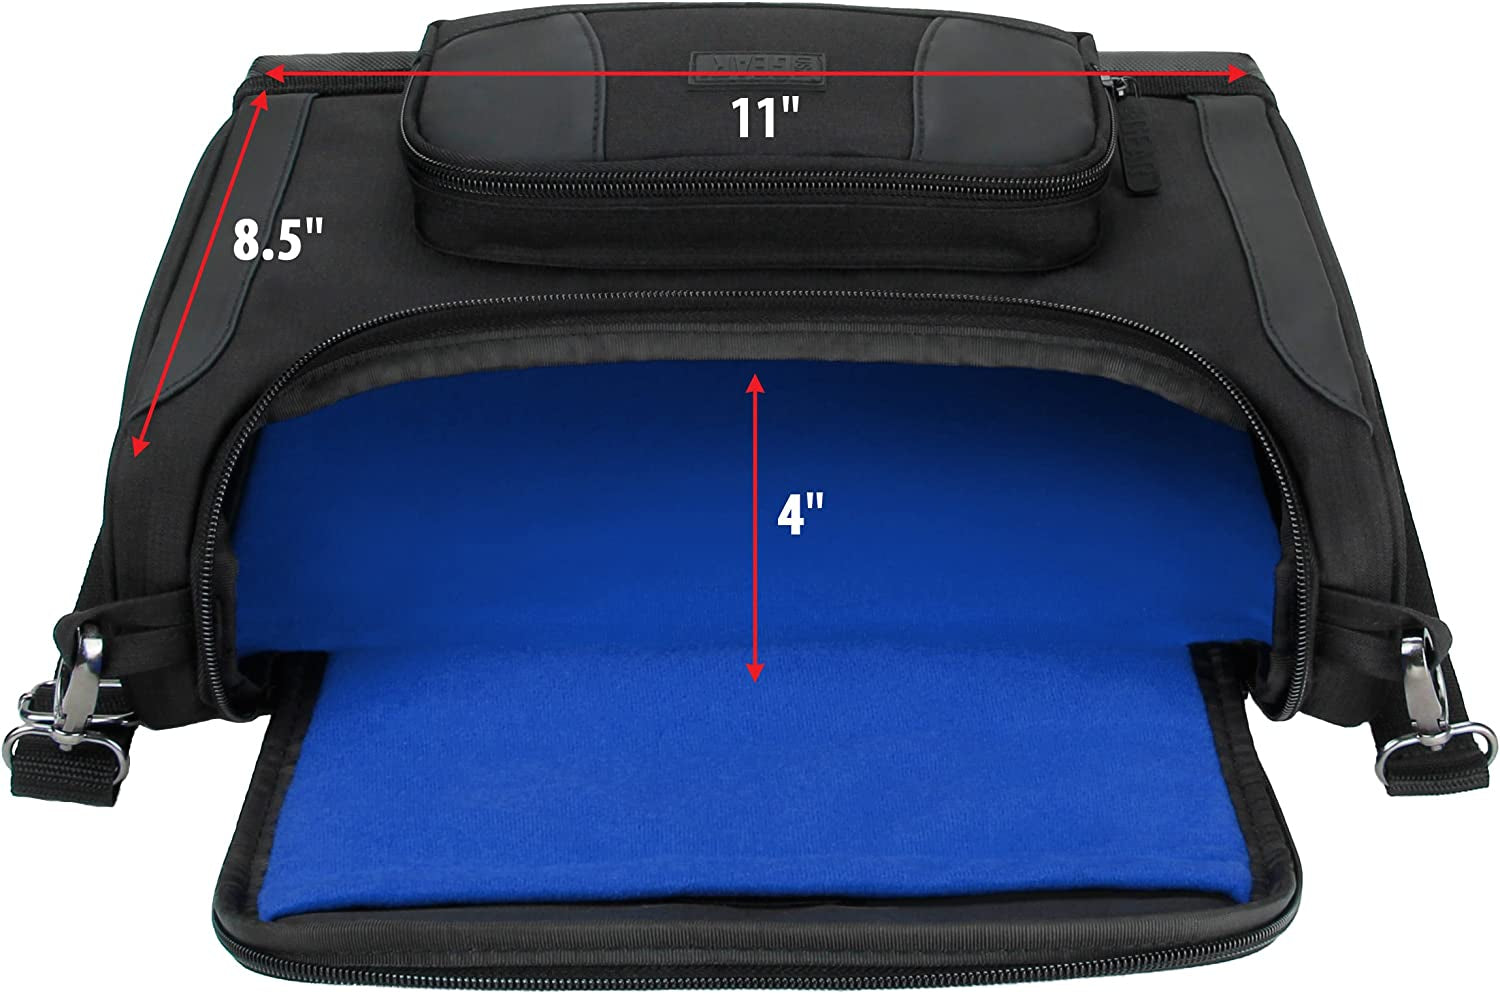 USA GEAR Mini Projector Case S7 Pro Portable Projector Bag Carrying Case with Accessory Storage